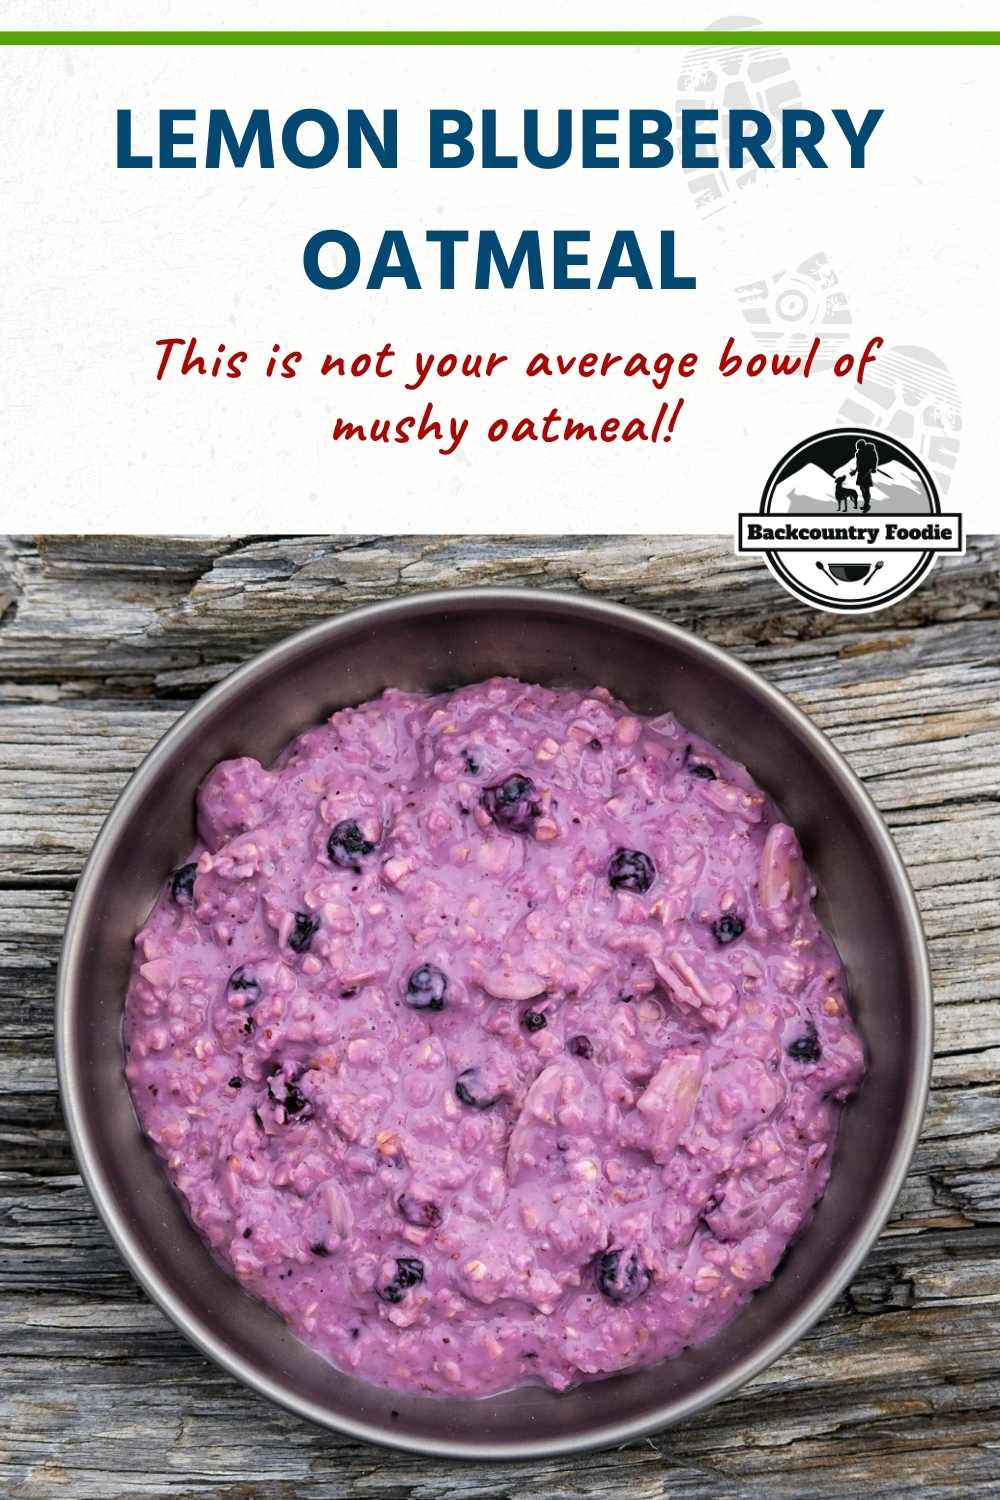 Can’t stomach another packet of instant oatmeal? Not to worry because our lemon blueberry oatmeal backpacking recipe packs loads of nutrition and flavor! #backpackingmeals #backpackingrecipes #backpackingbreakfast #hikingfoodideas #backcountryfoodie